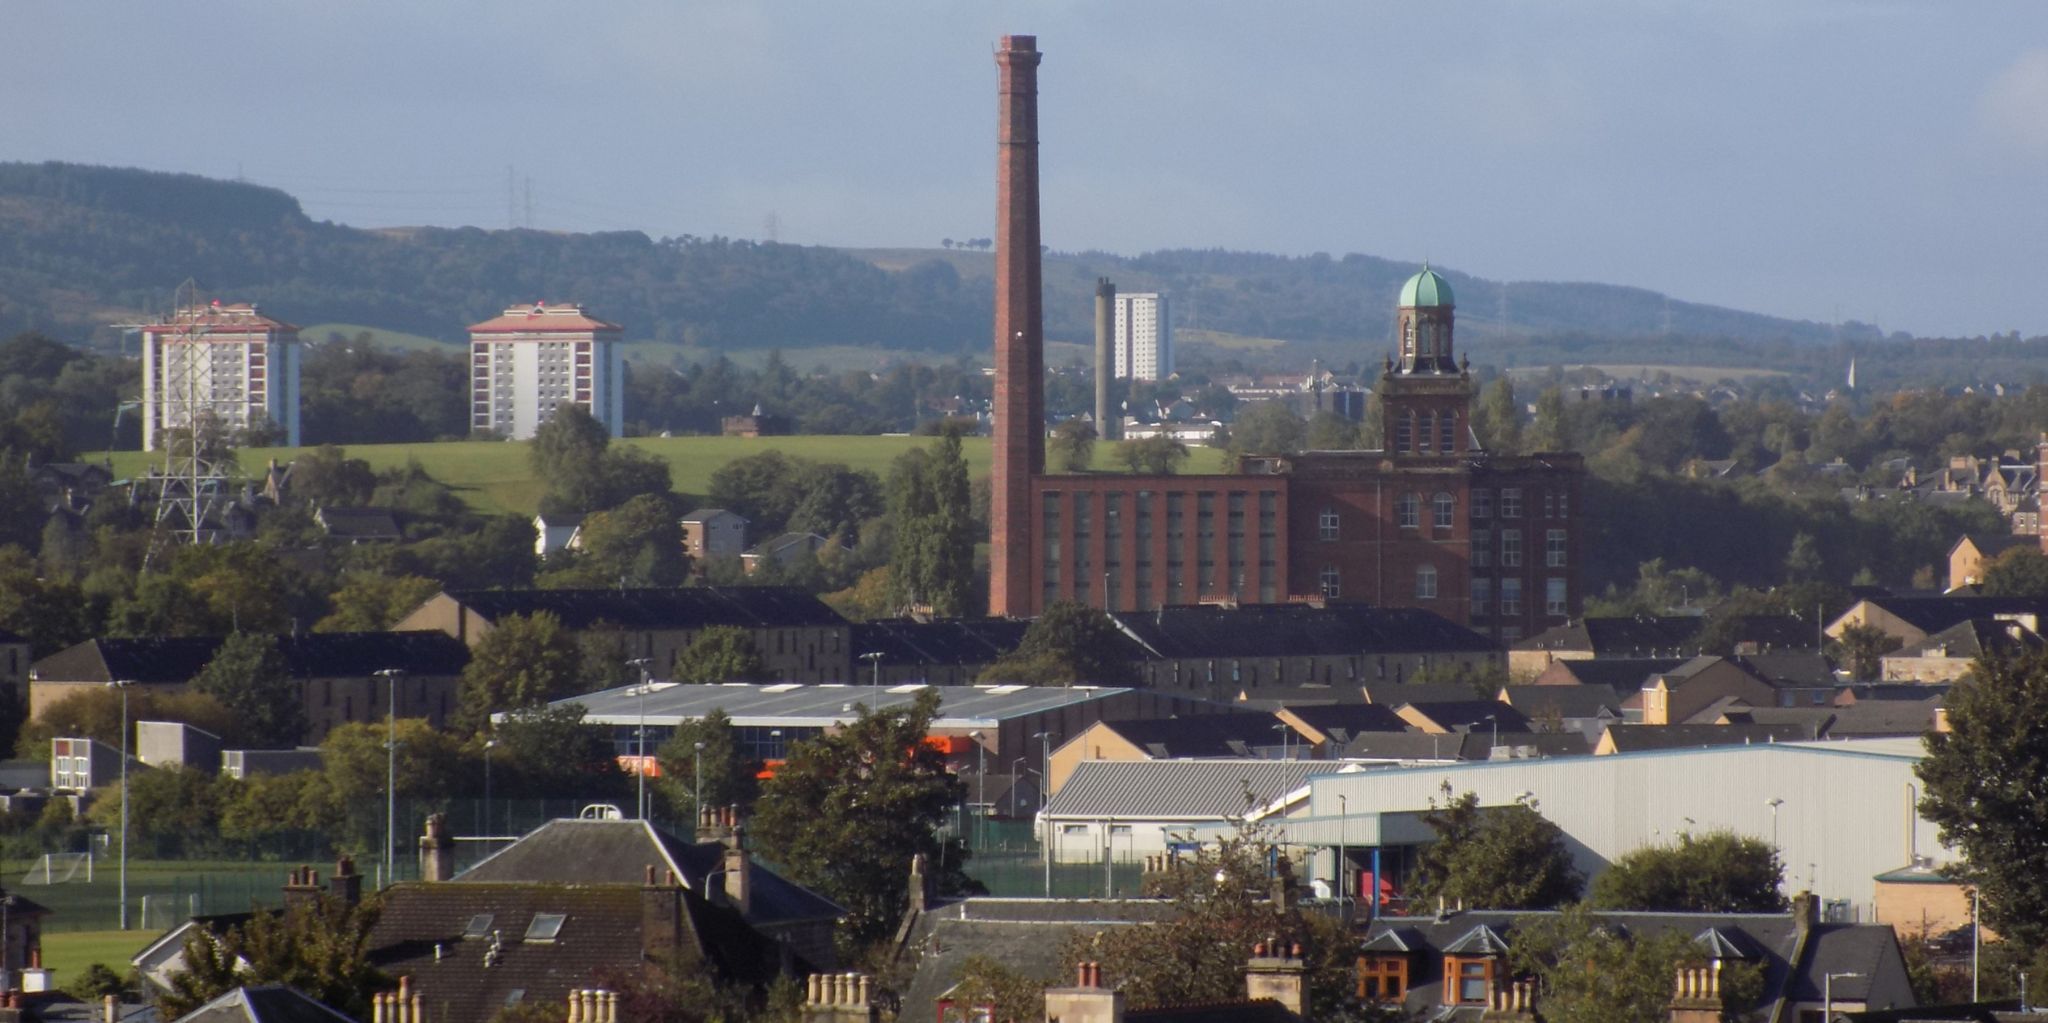 The Coats Factory from Barshaw Park